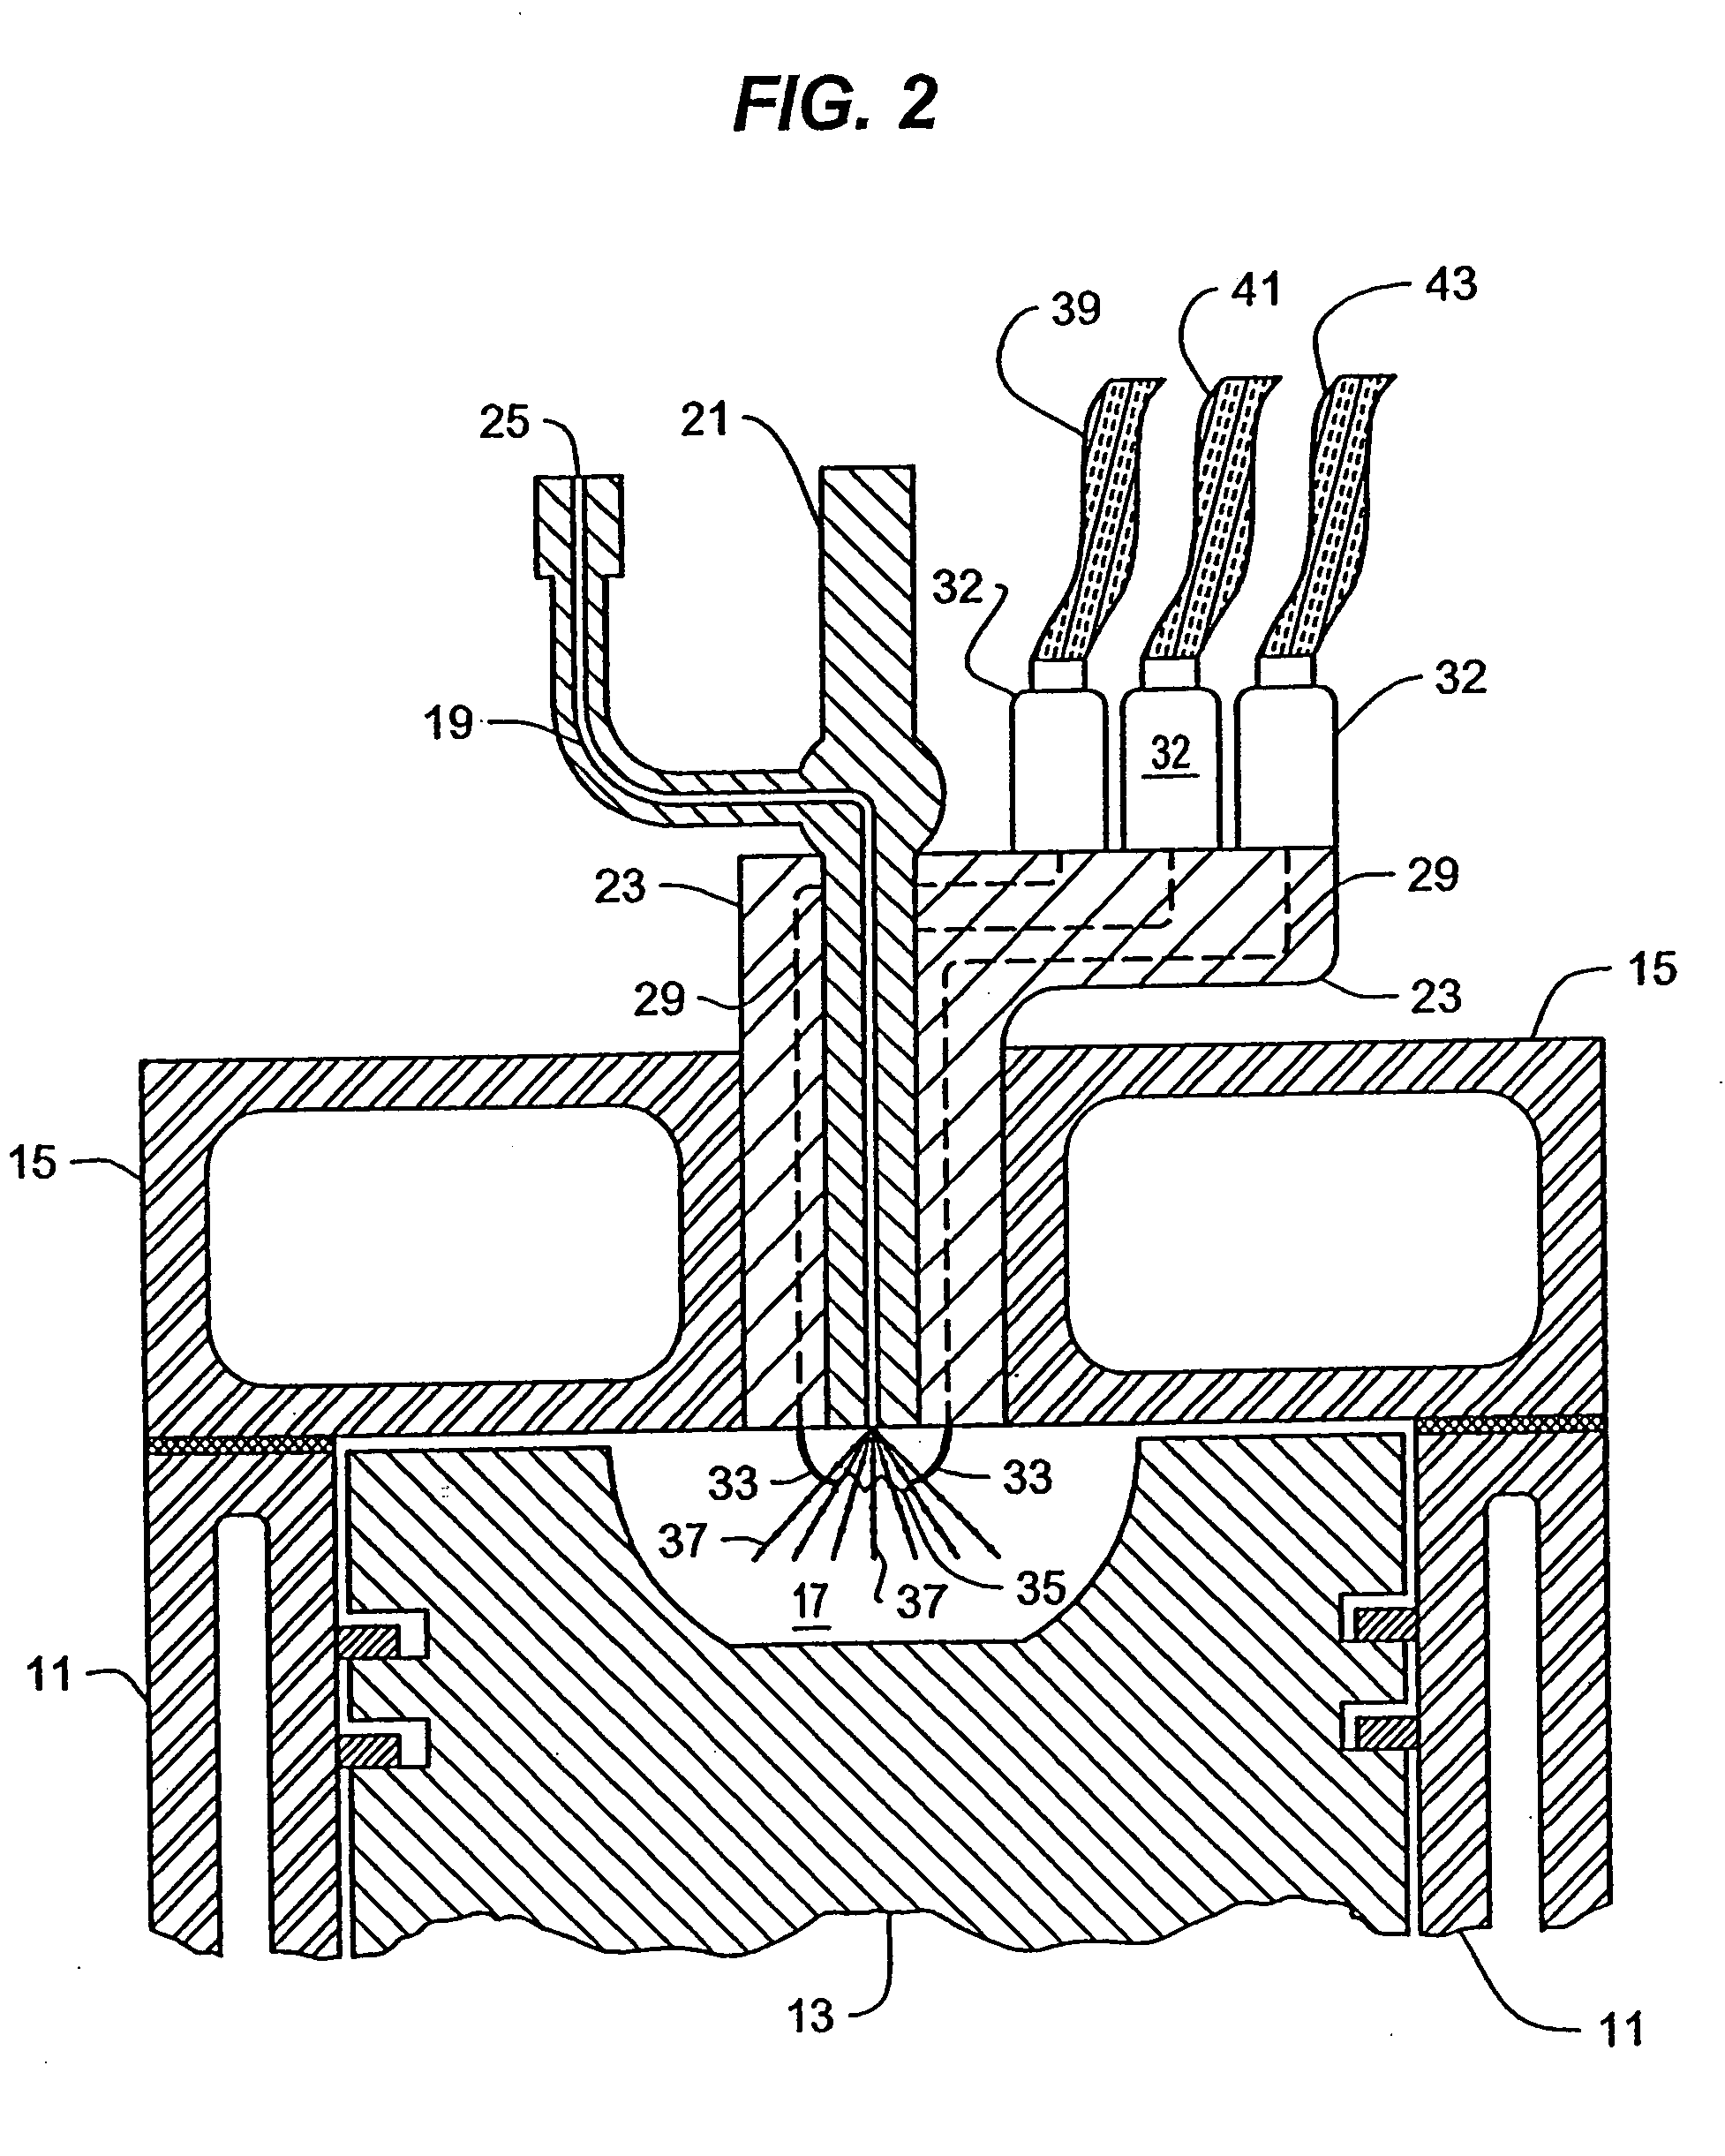 Furnace using plasma ignition system for hydrocarbon combustion